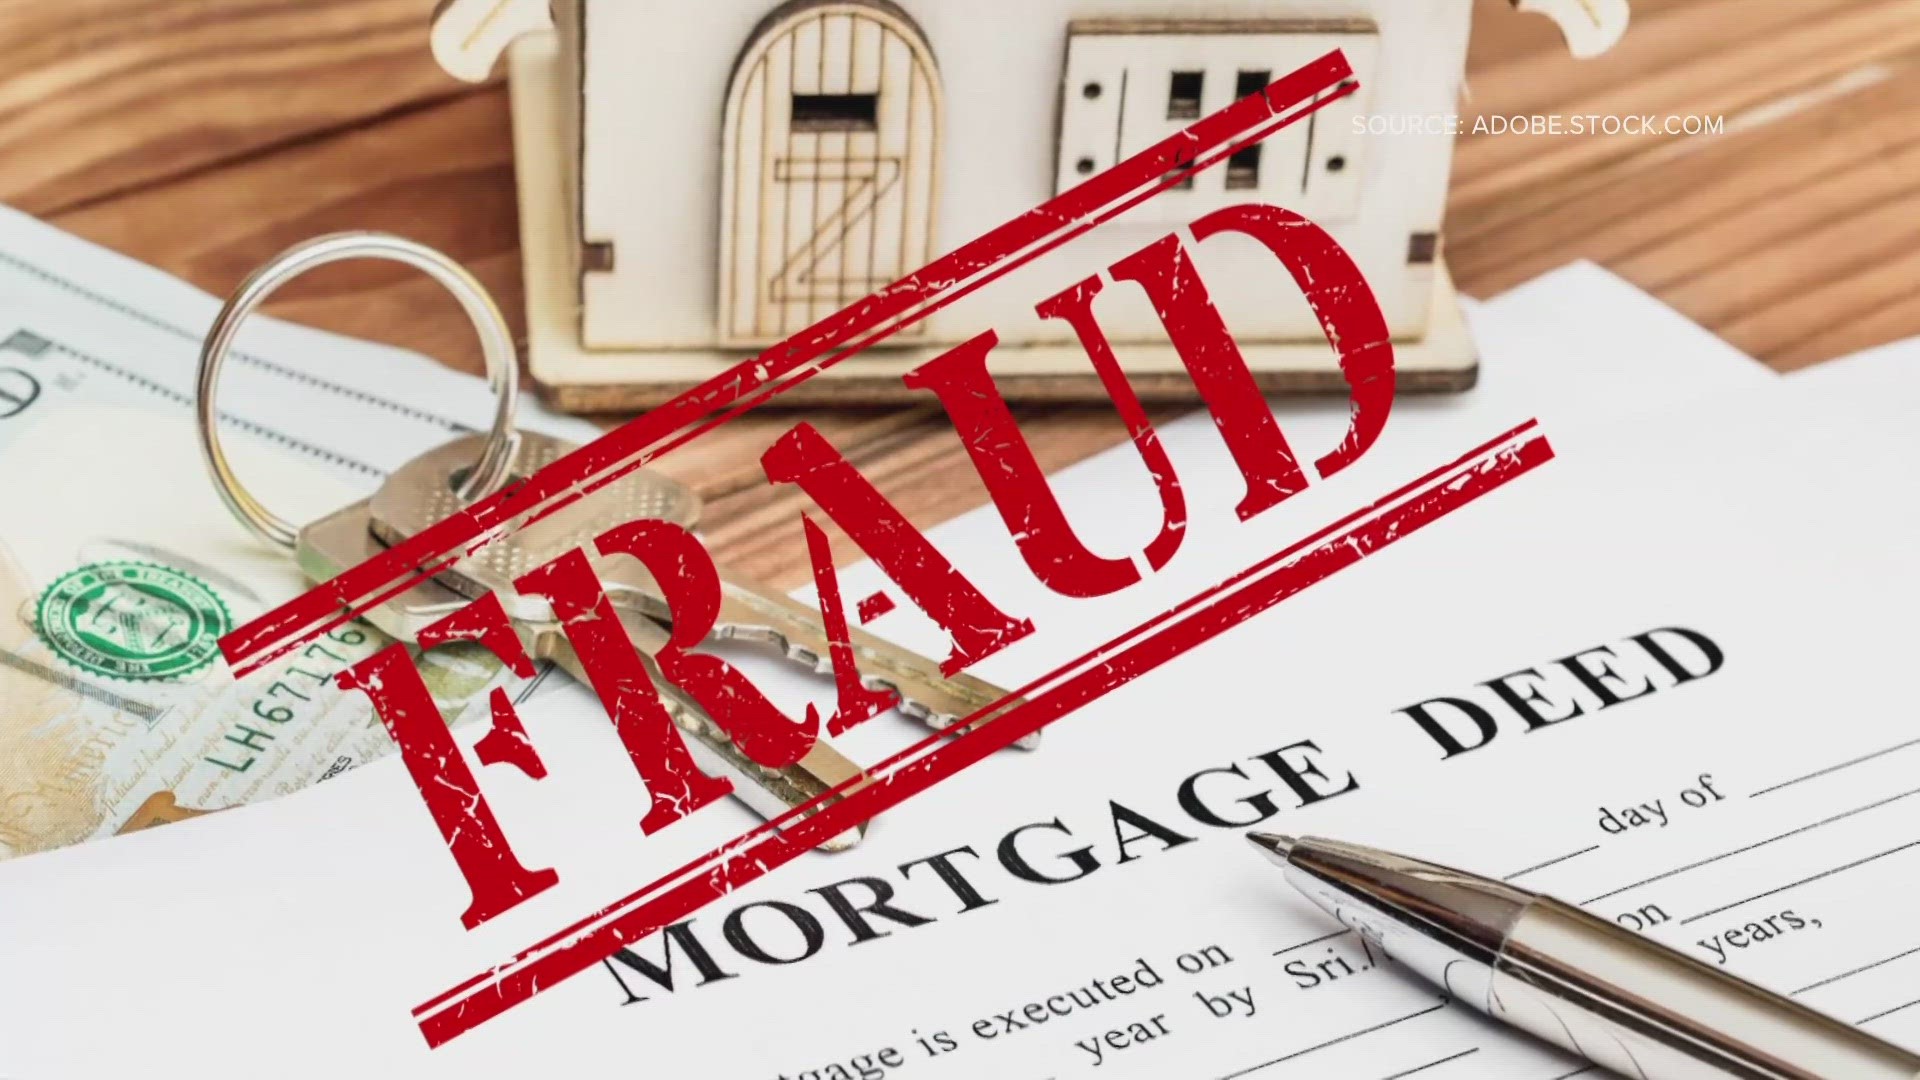 Here's what homeowners need to know about property title fraud and how to protect themselves from it.